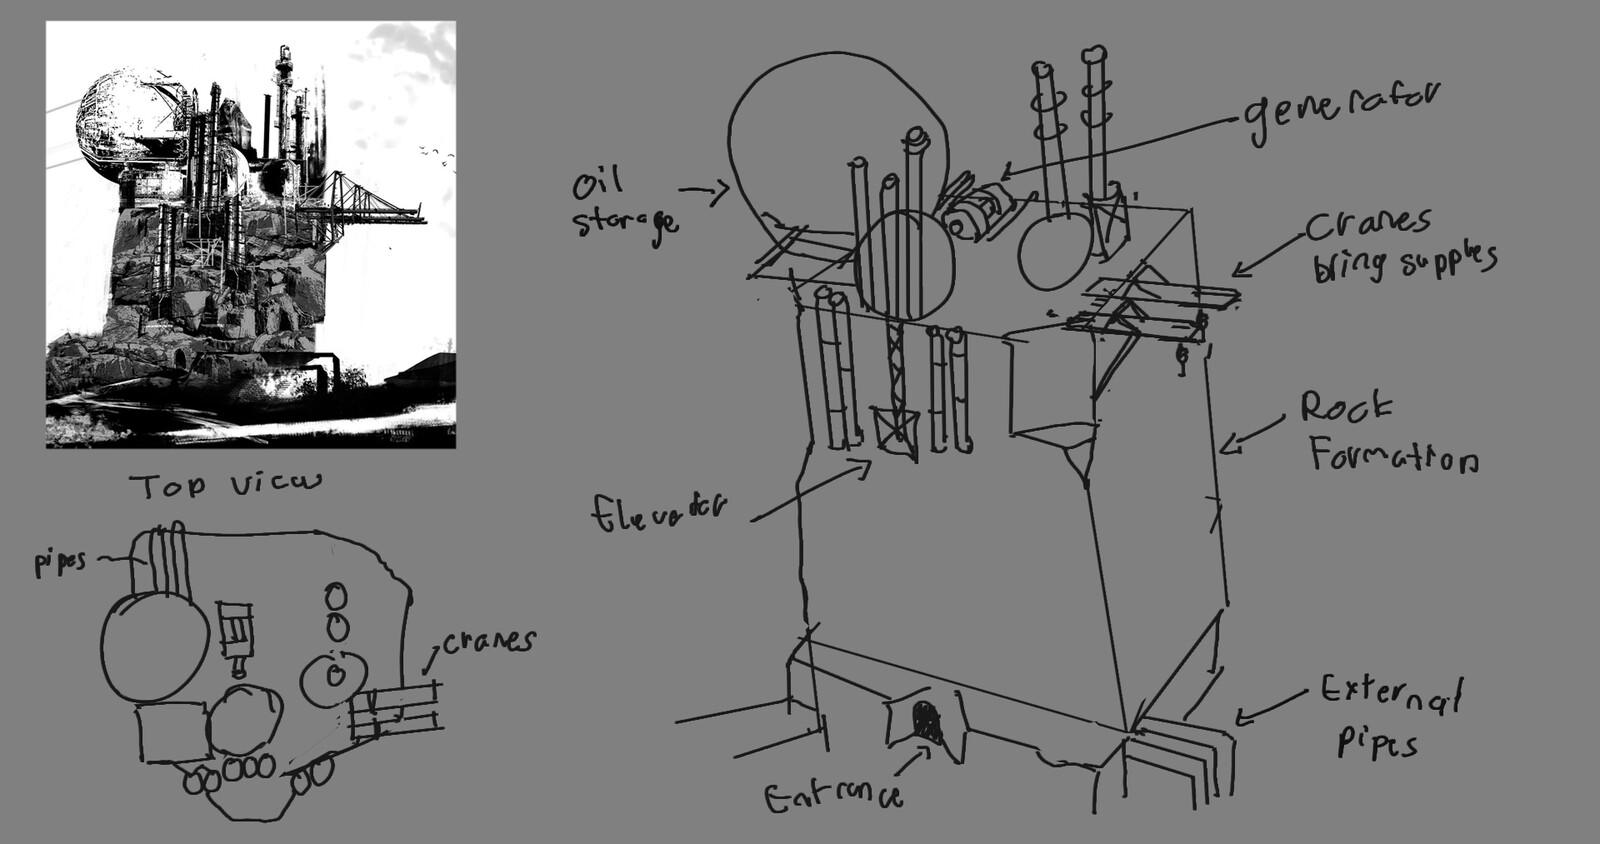 Sketch schematic of the top view and 3d view.